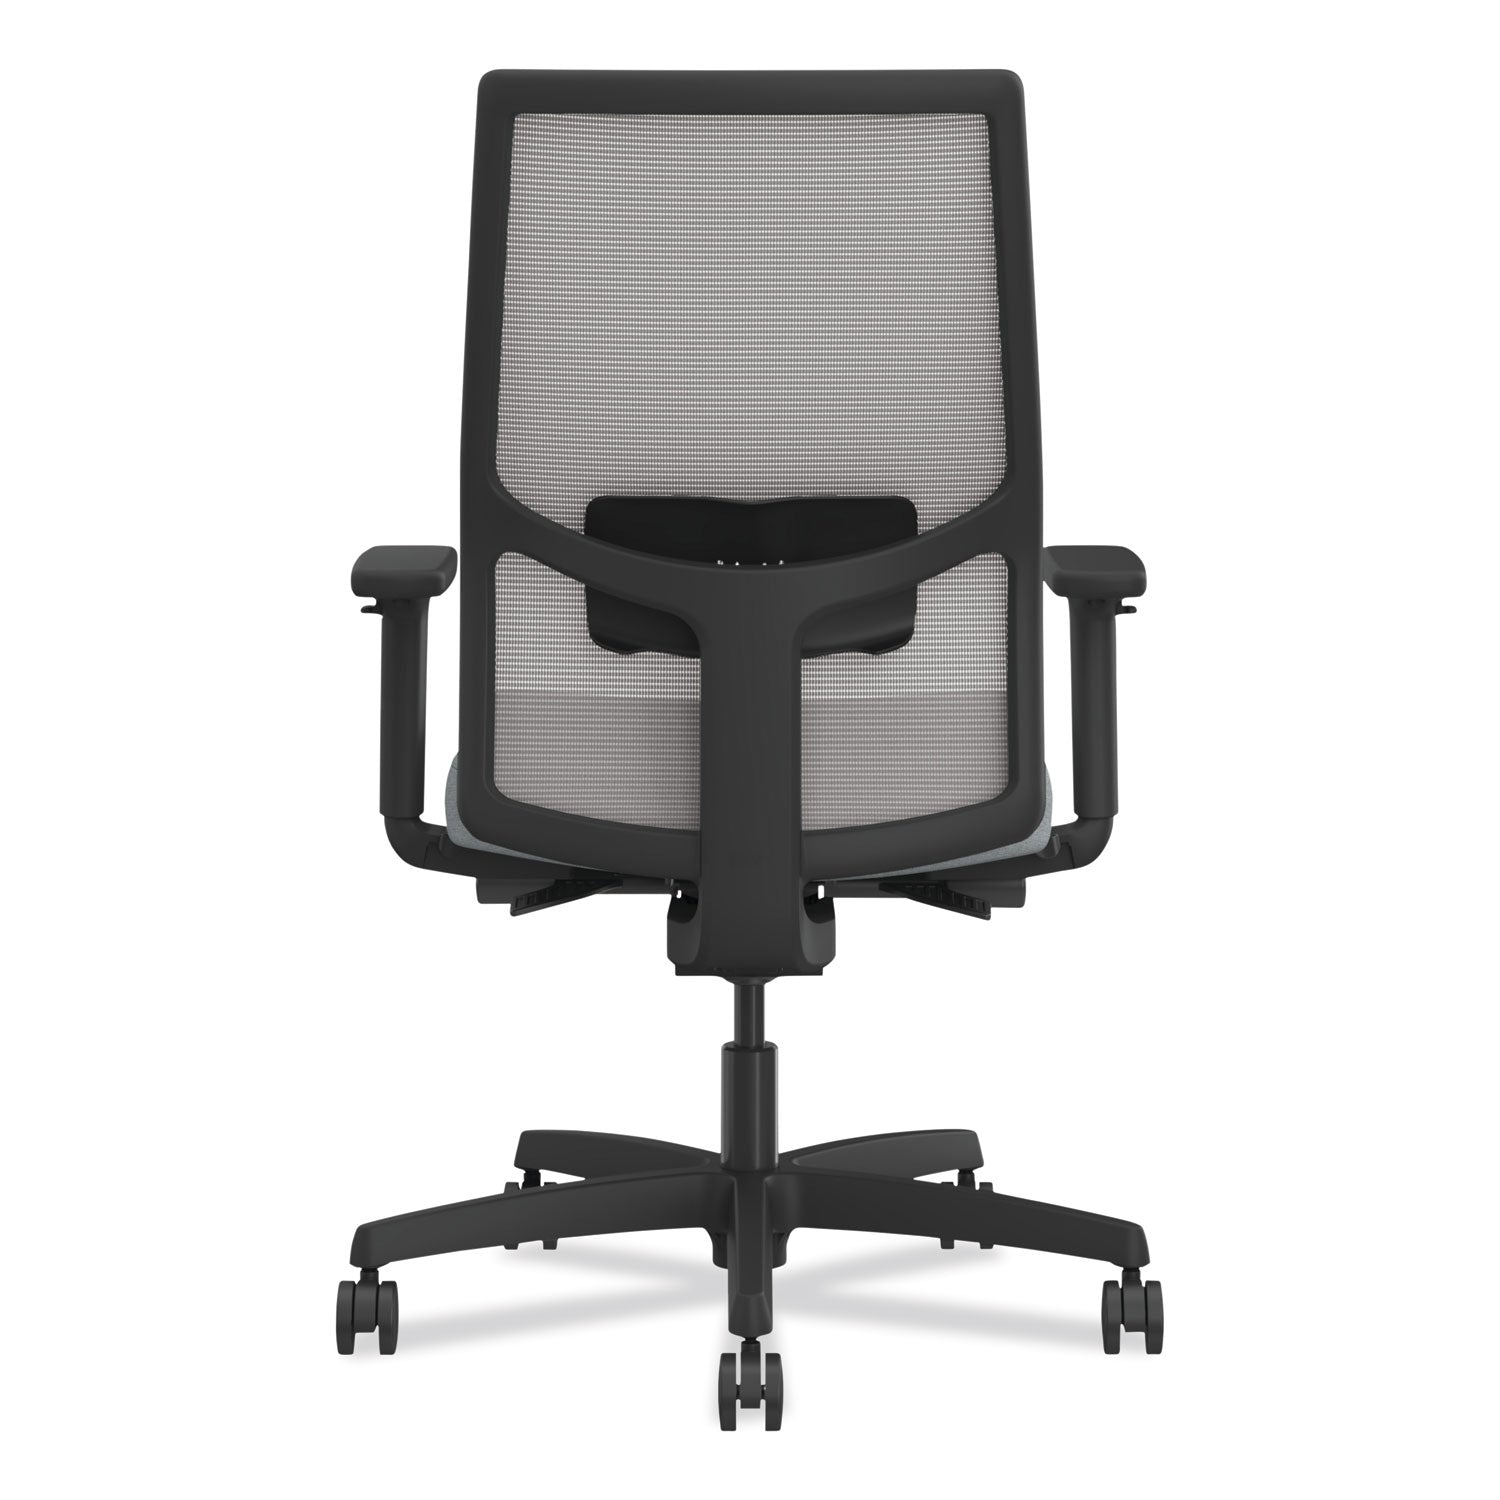 ignition-20-4-way-stretch-mid-back-mesh-task-chair-white-adjustable-lumbar-support-cloud-fog-white-ships-in-7-10-bus-days_honi2mm2afh18bt - 2